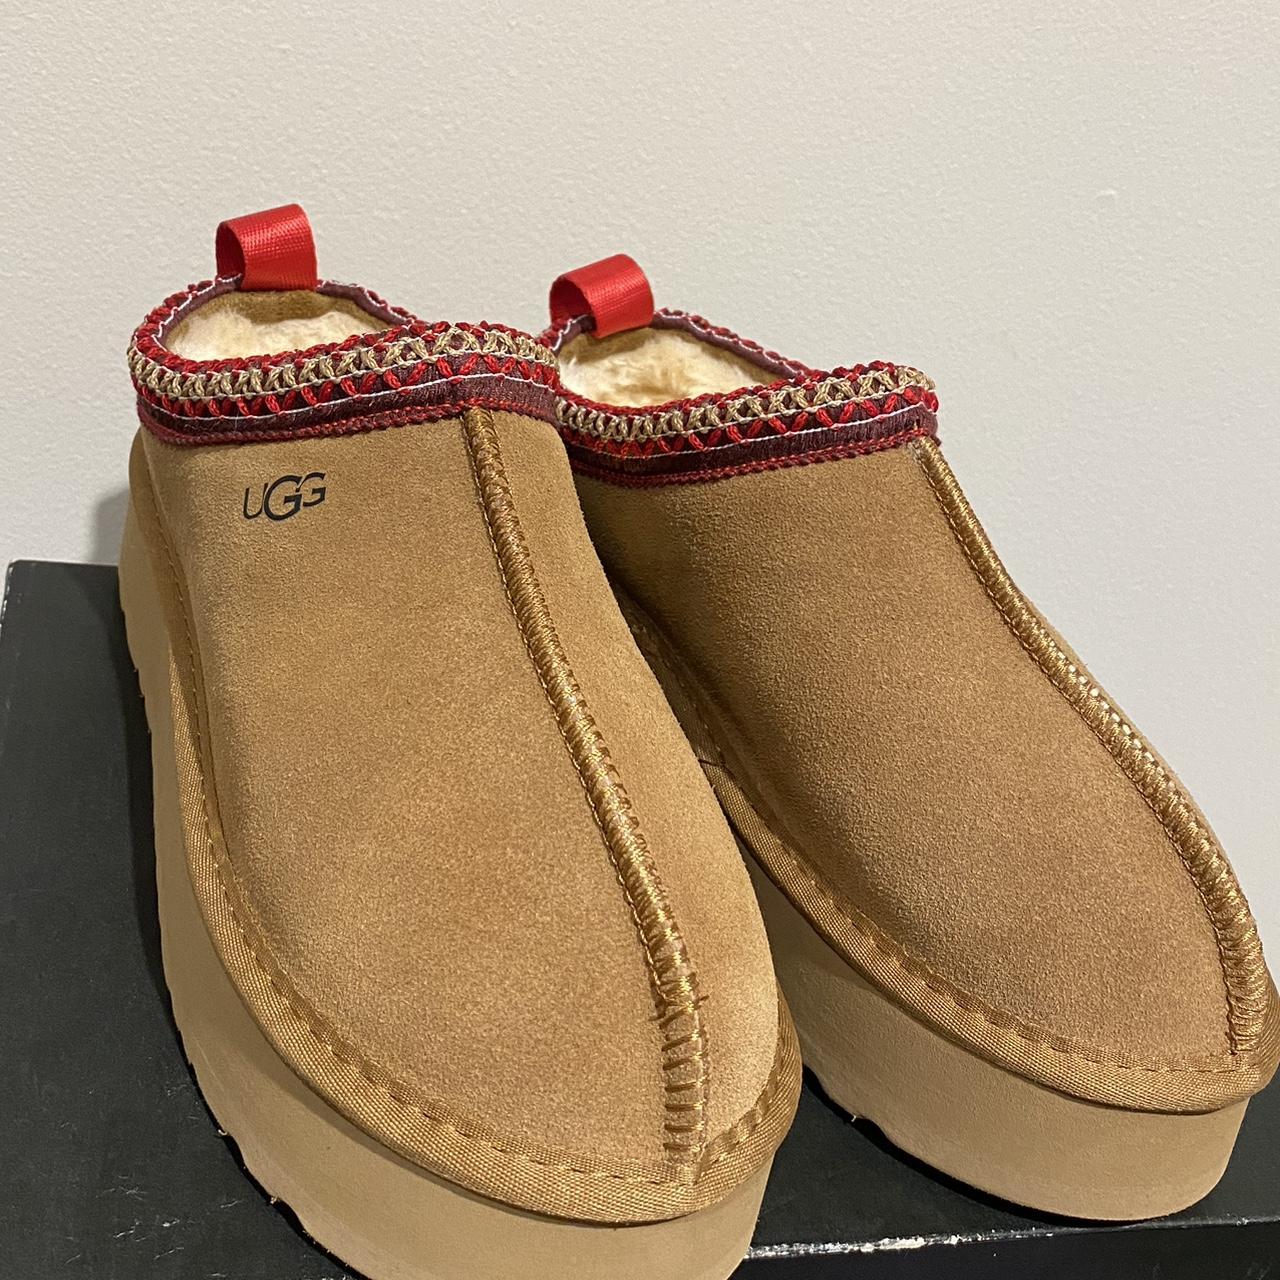 UGG Women's Brown and Red Slippers (5)